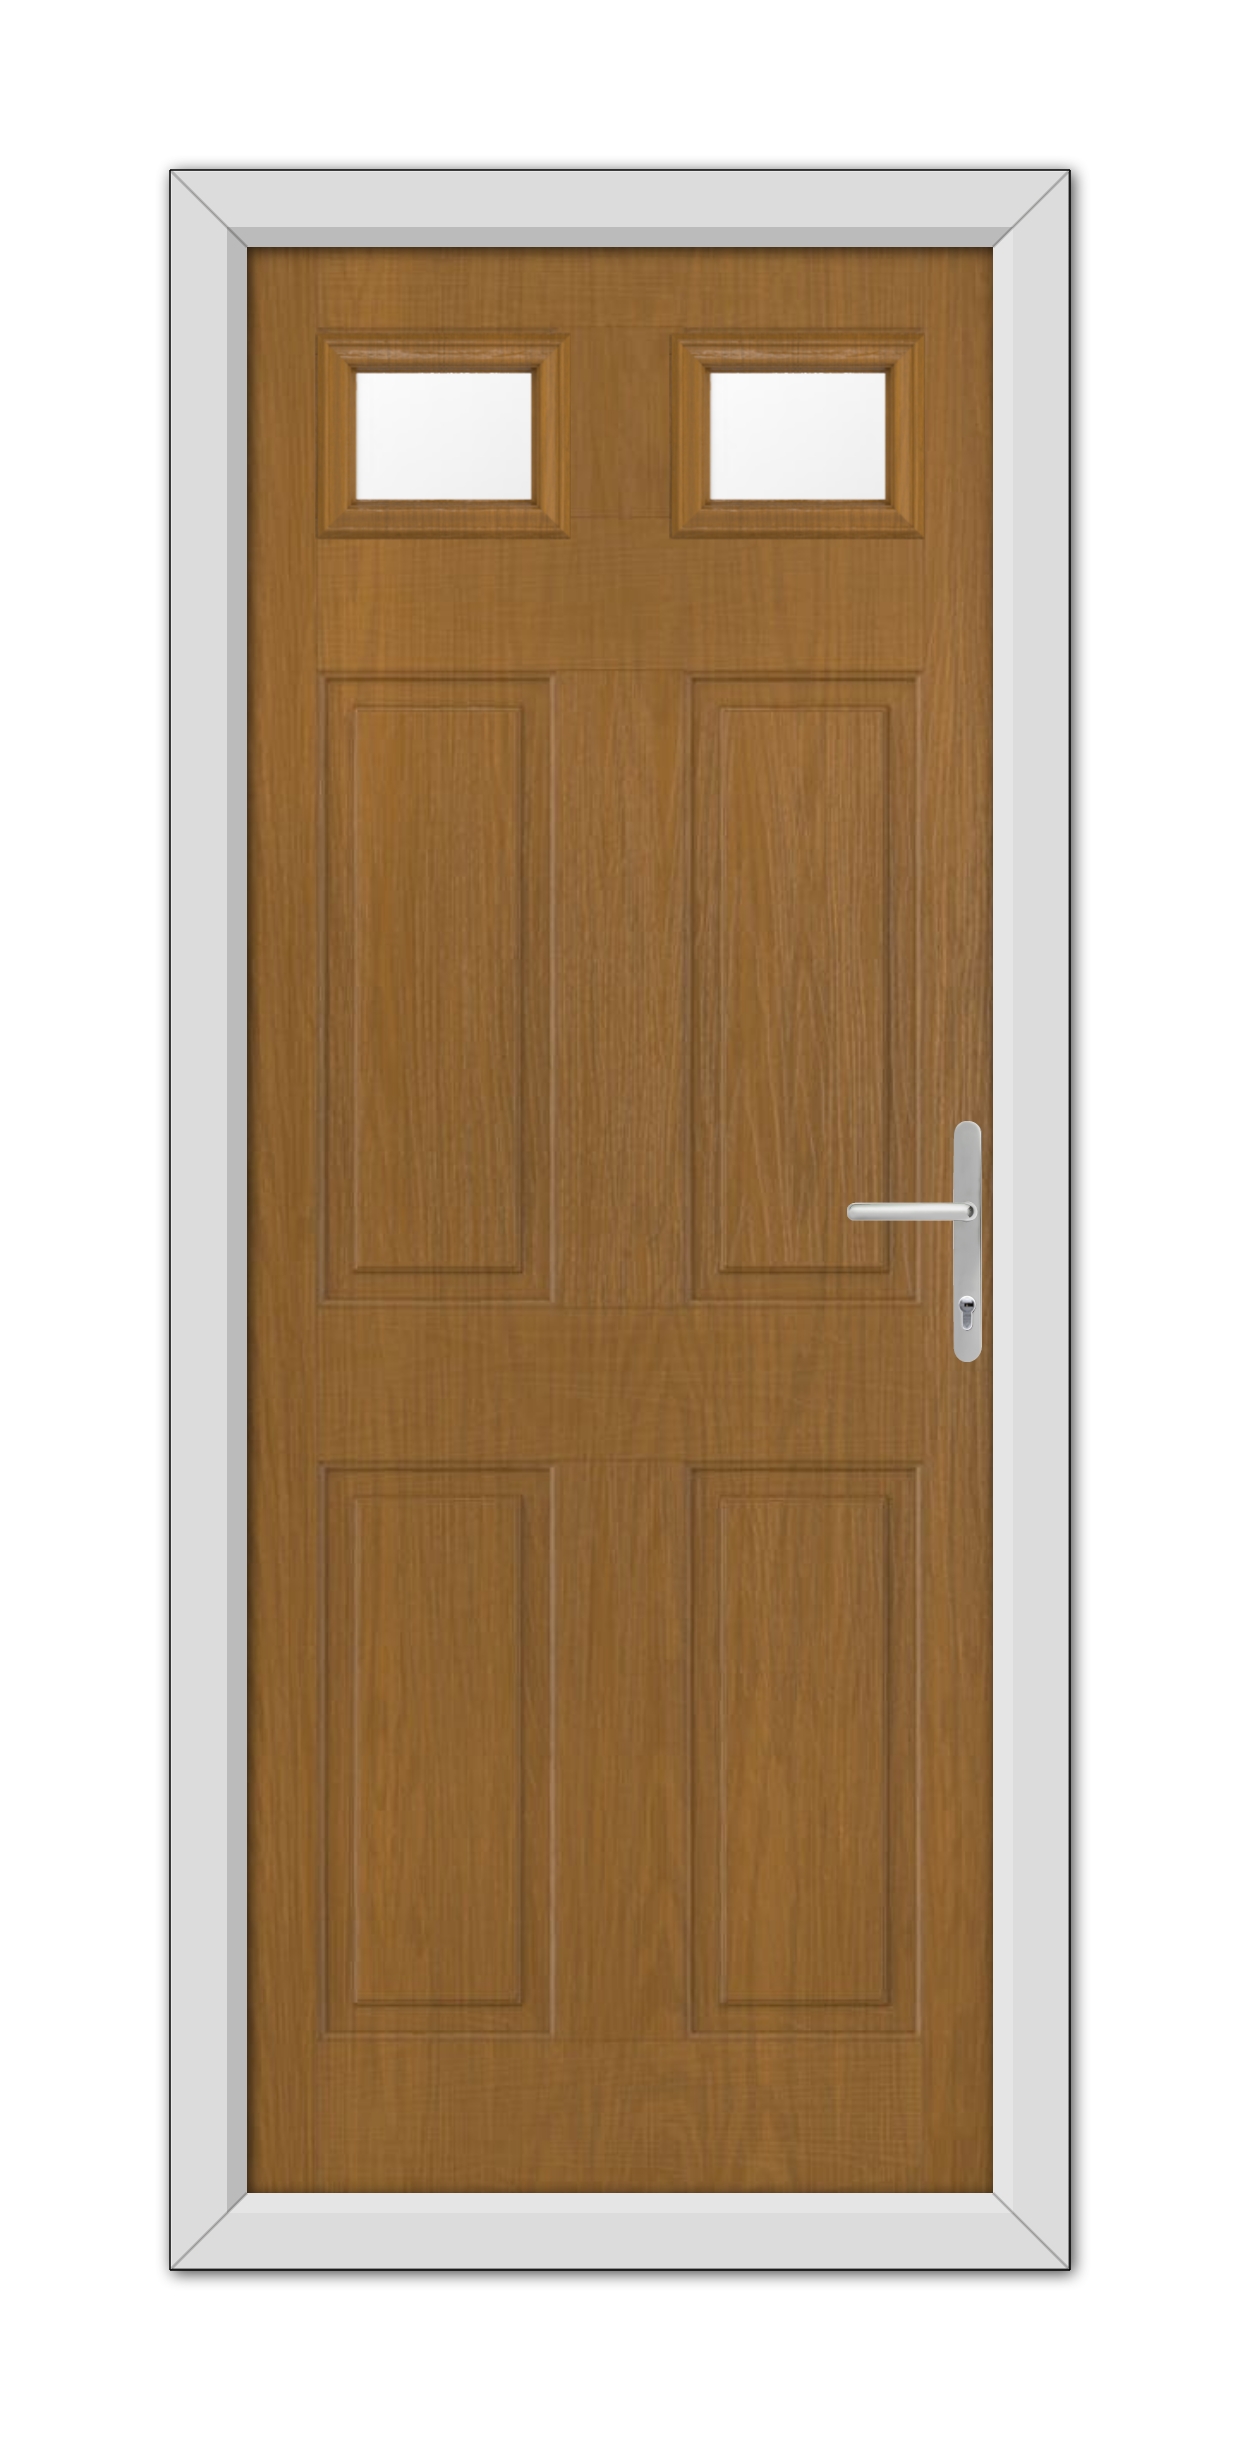 A Oak Middleton Glazed 2 Composite Door 48mm Timber Core with a white frame, featuring two rectangular windows at the top and a modern handle on the right side.